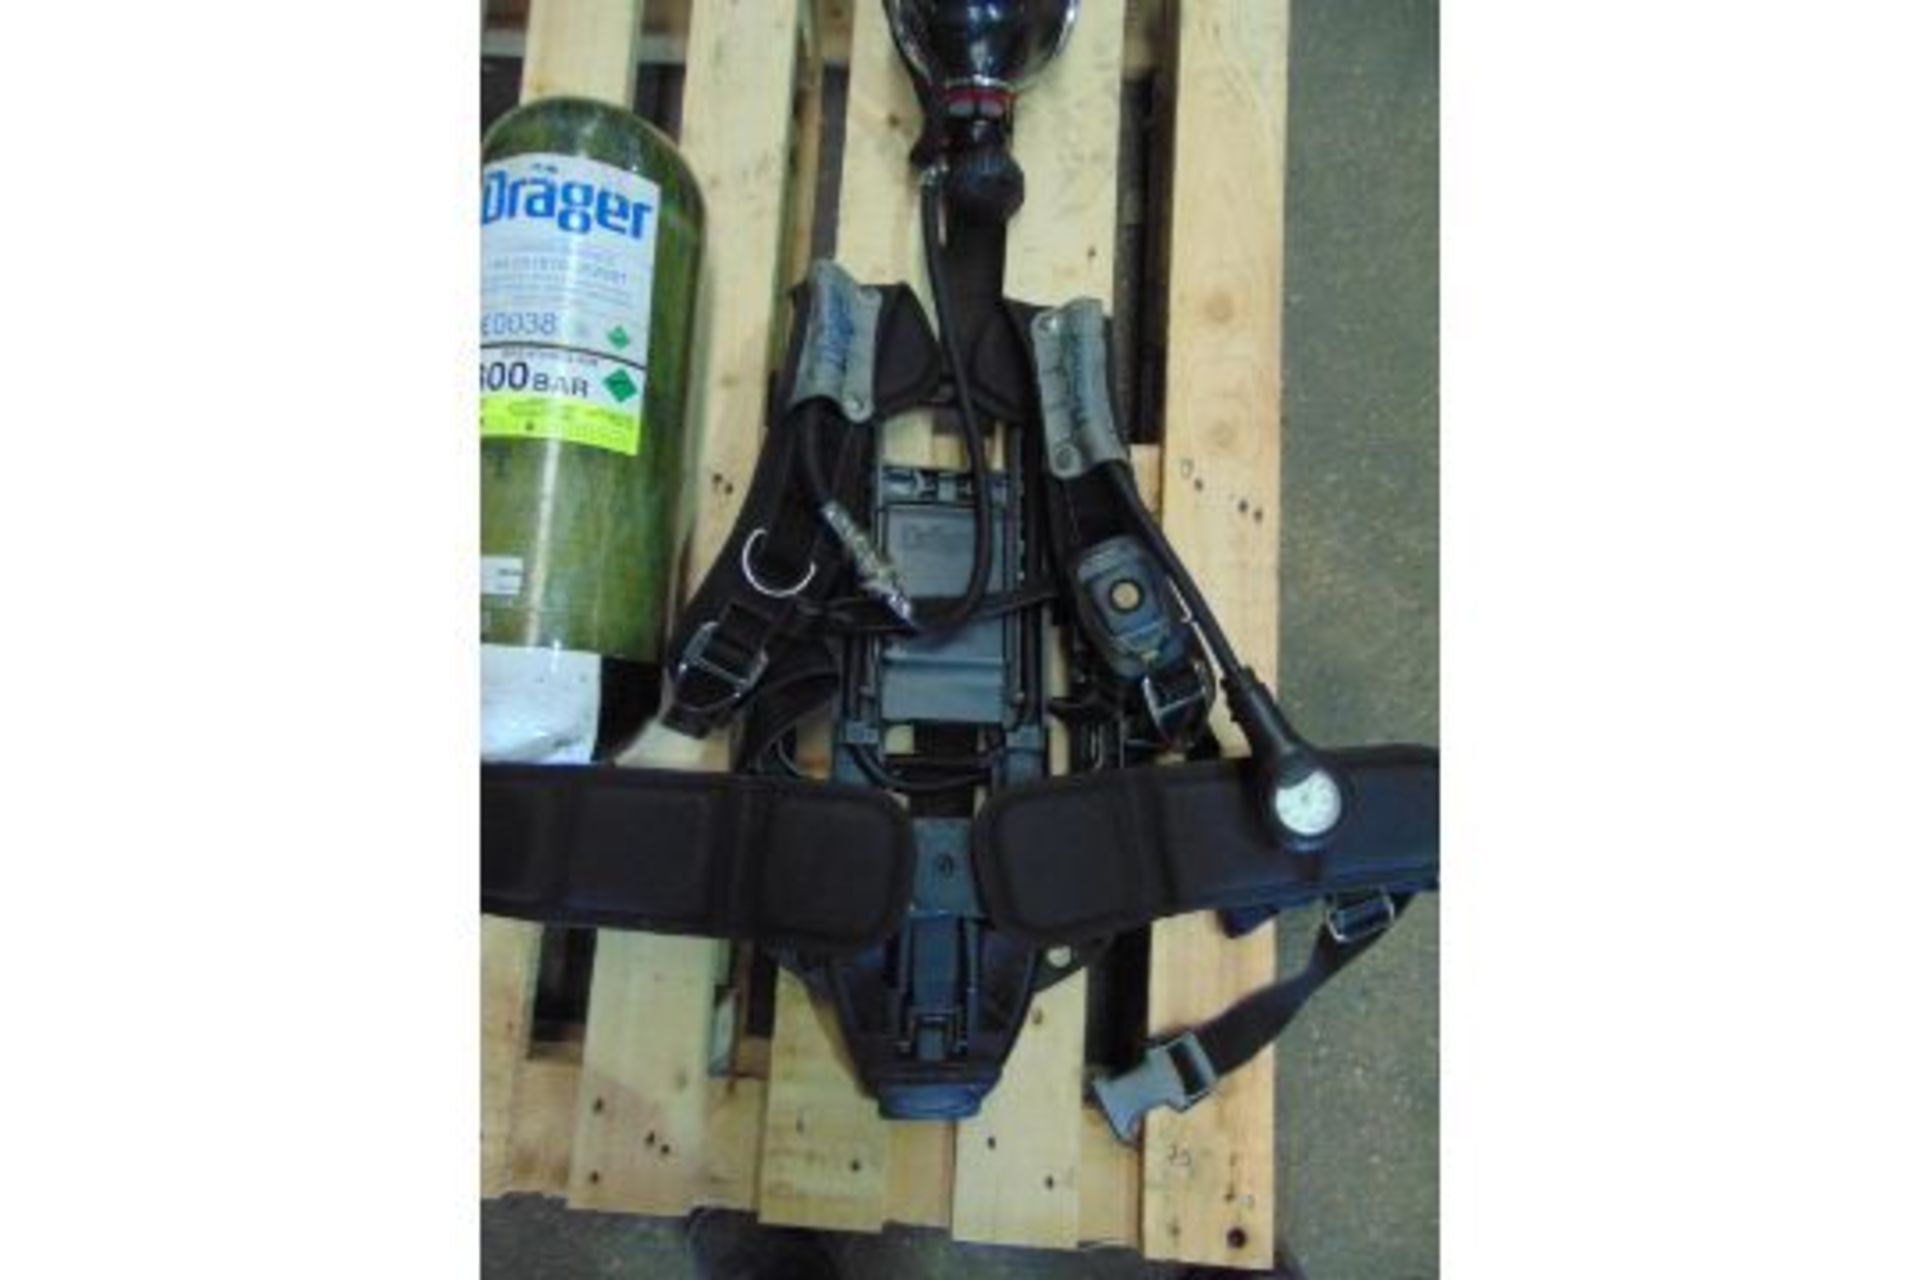 Drager PSS 7000 Self Contained Breathing Apparatus w/ 2 x Drager 300 Bar Air Cylinders - Image 10 of 23